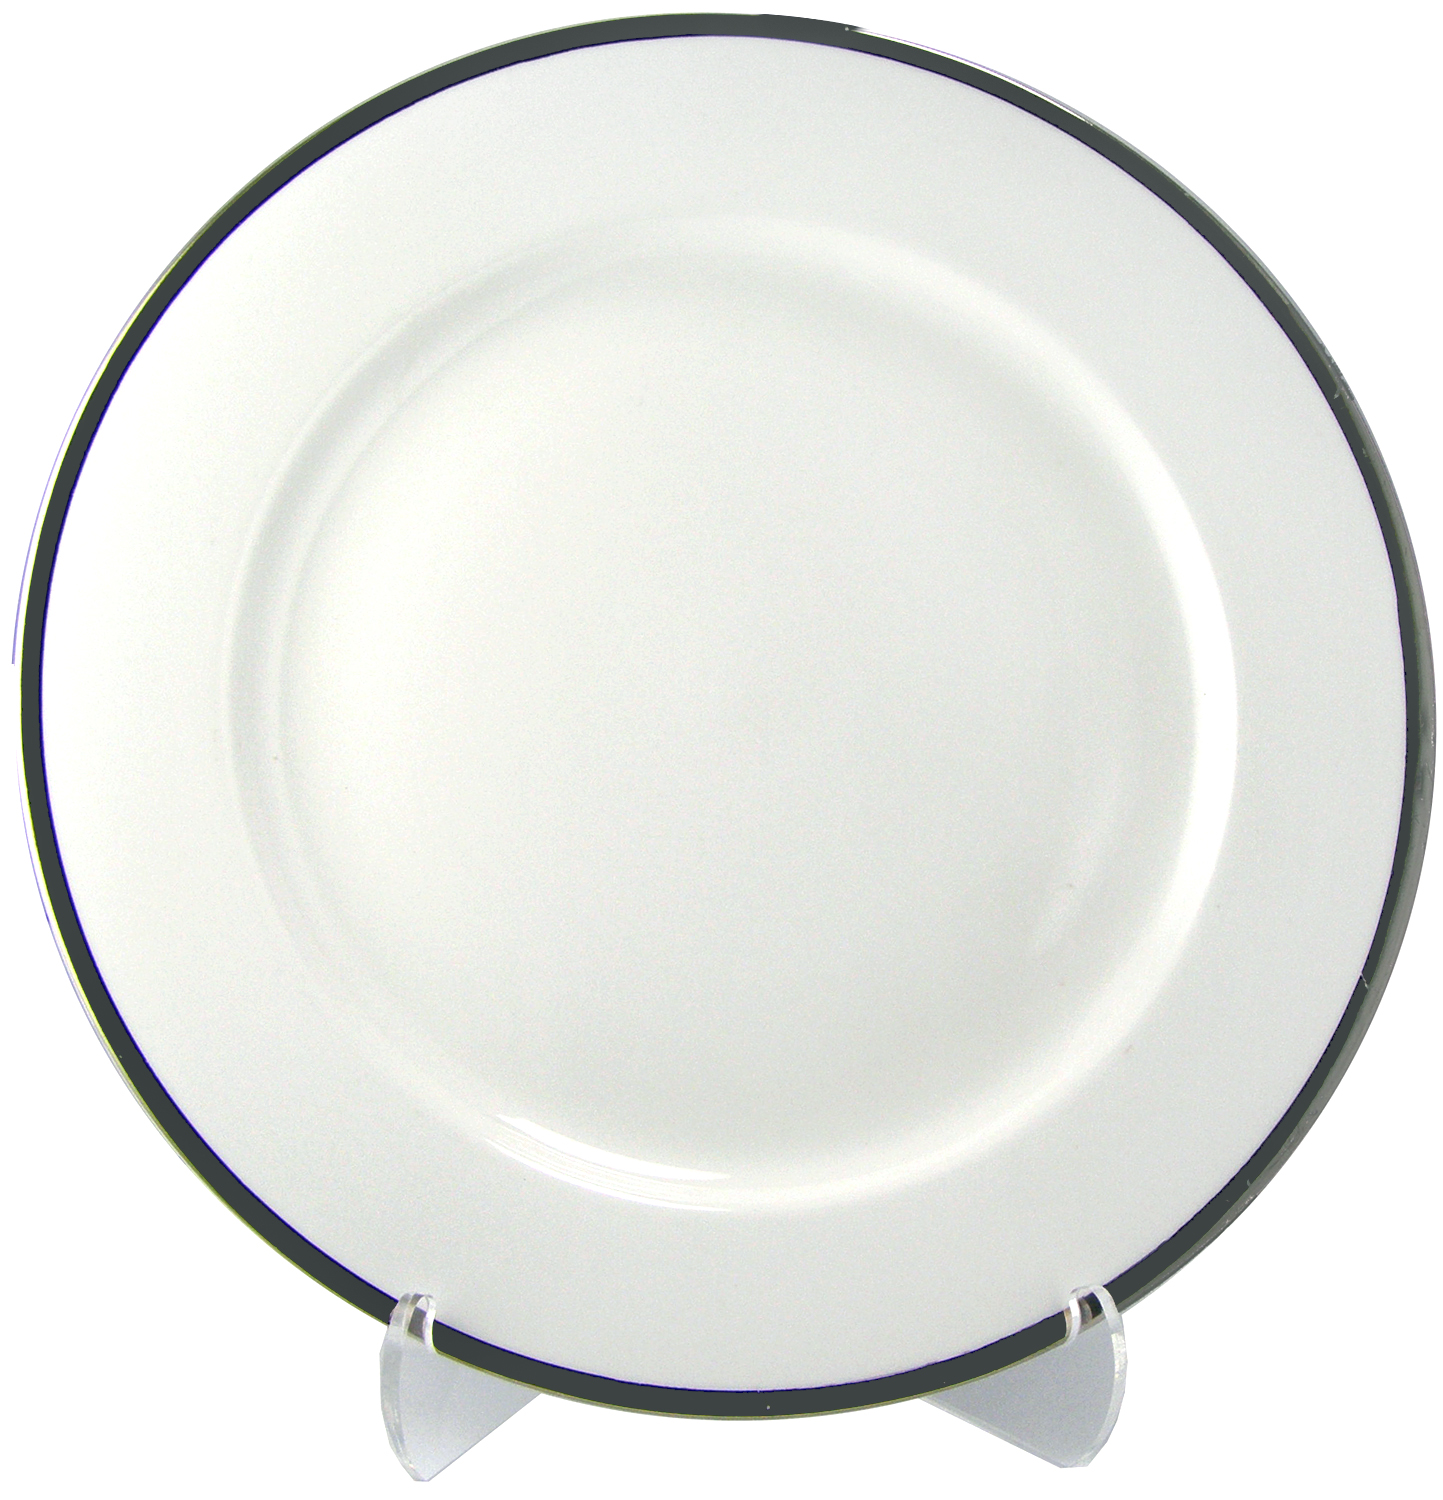 12 inch double rim plate